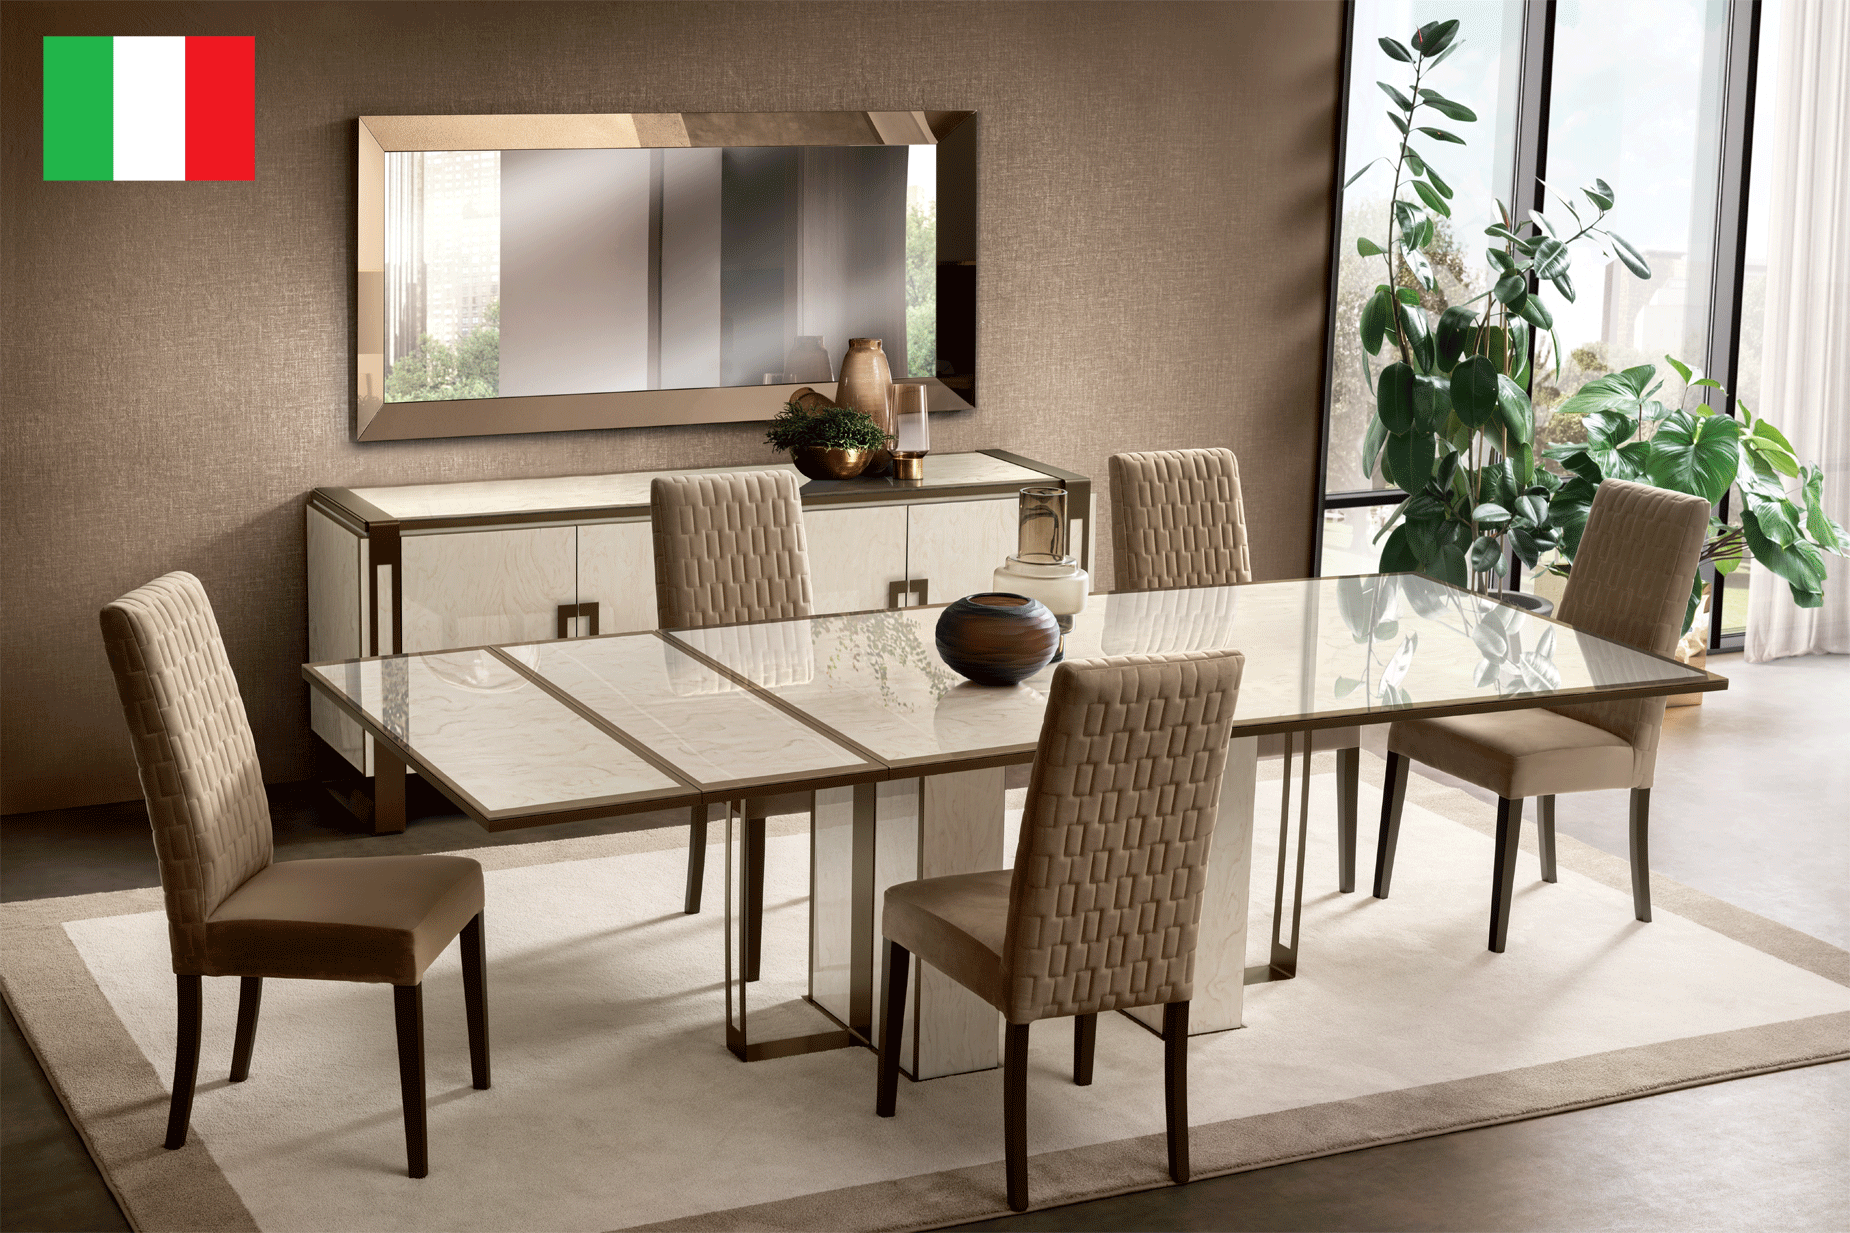 Brands Arredoclassic Dining Room, Italy Poesia Dining Room